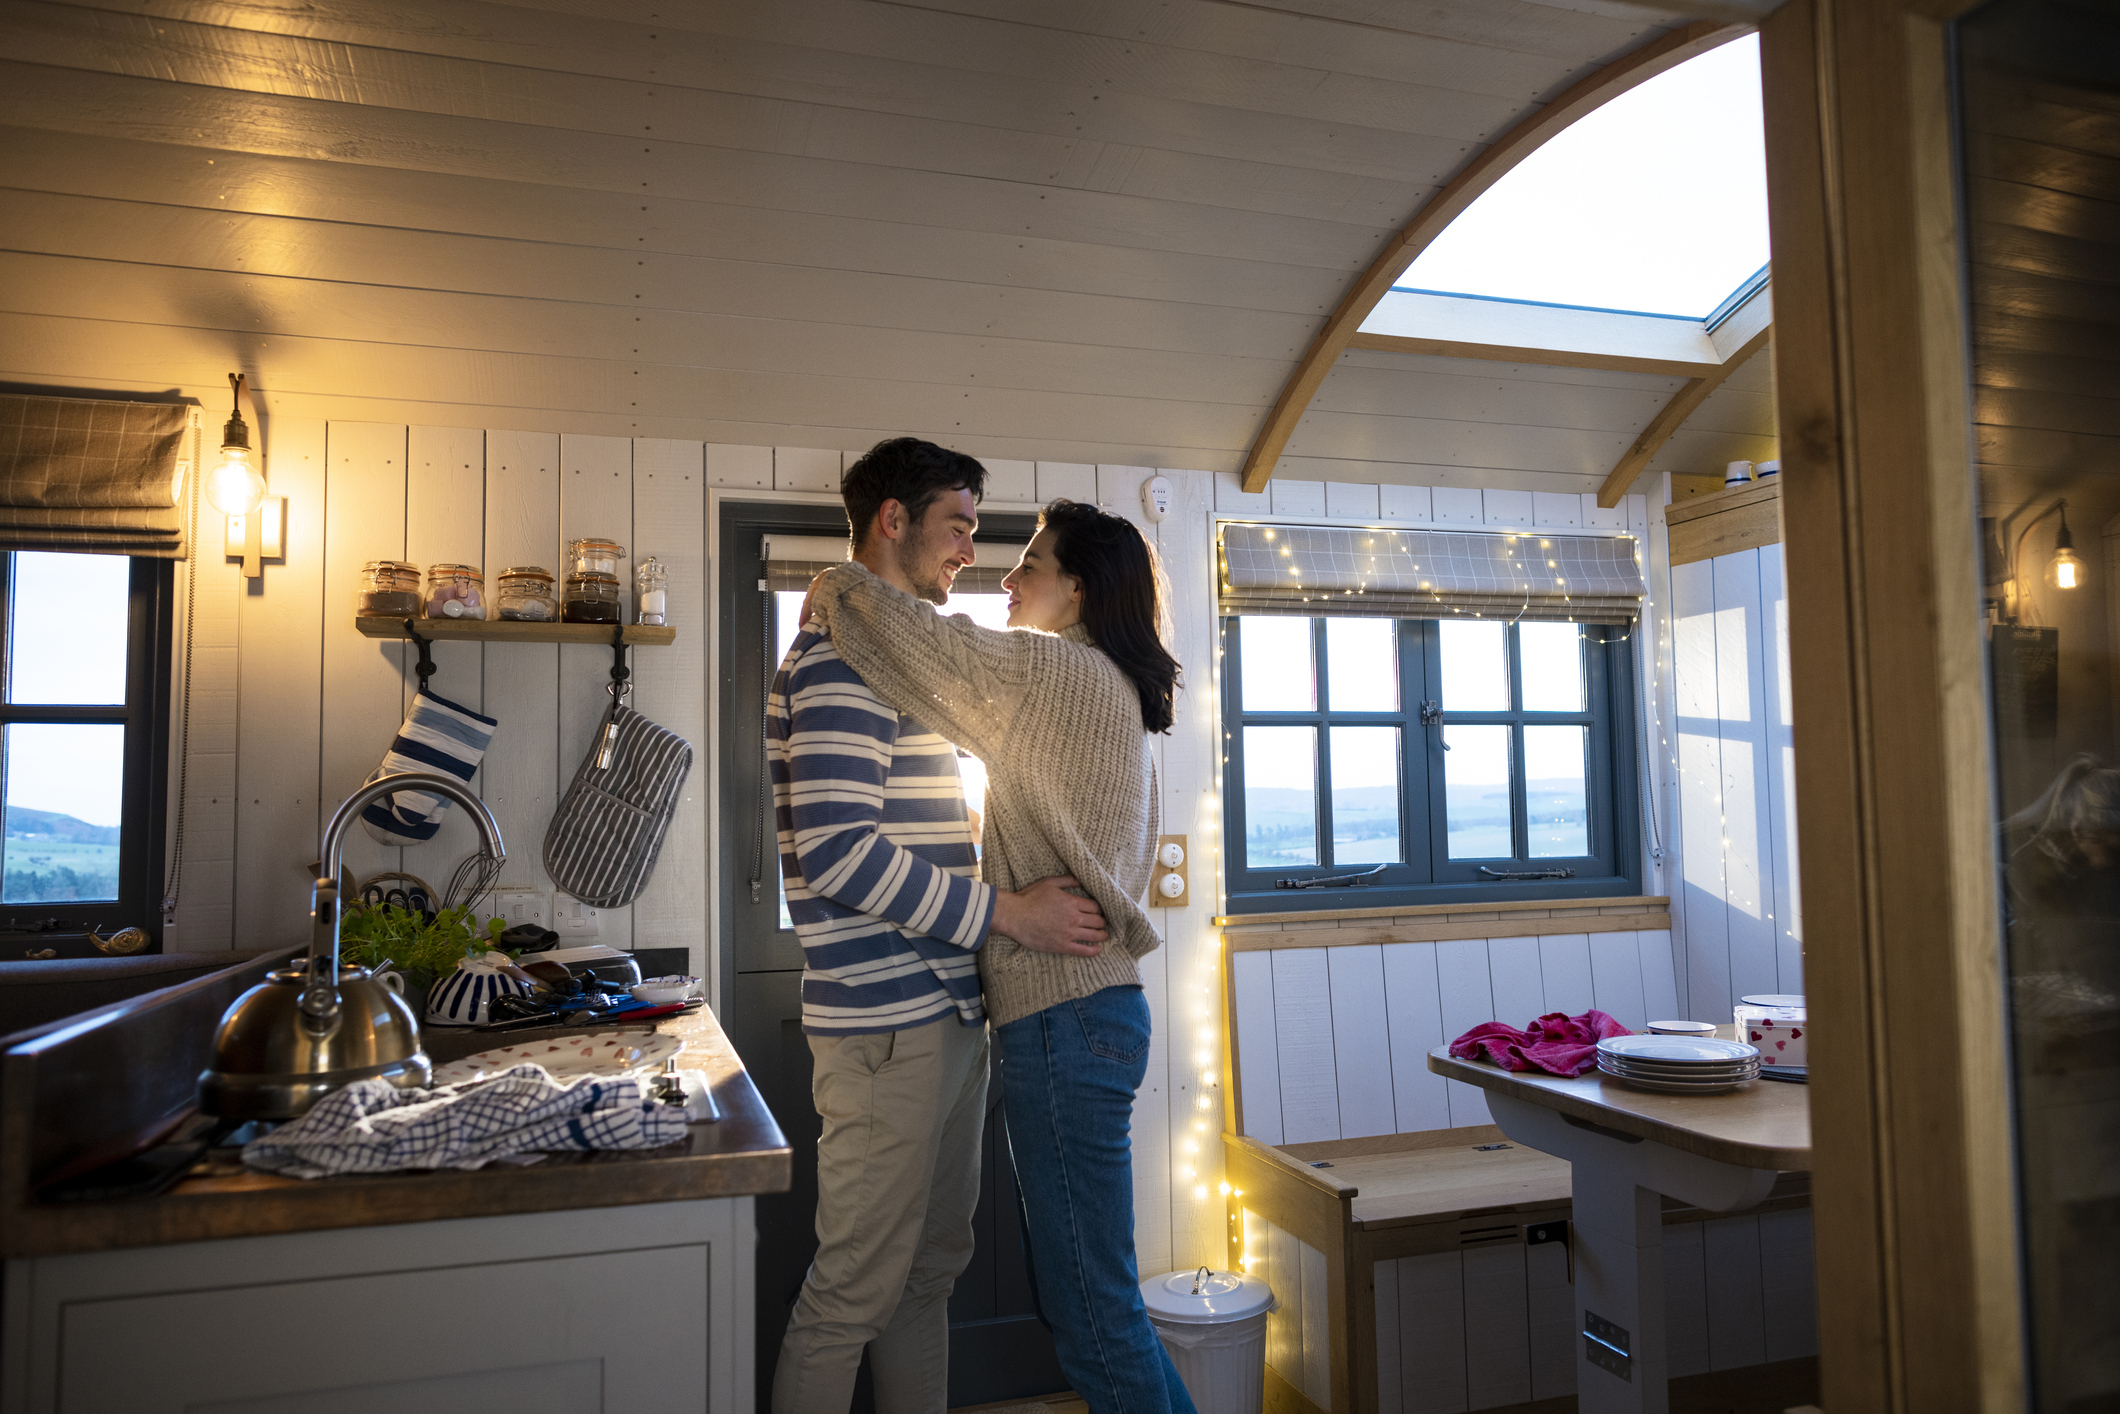 Couple embracing in a cozy tiny house kitchen with string lights, showing affection